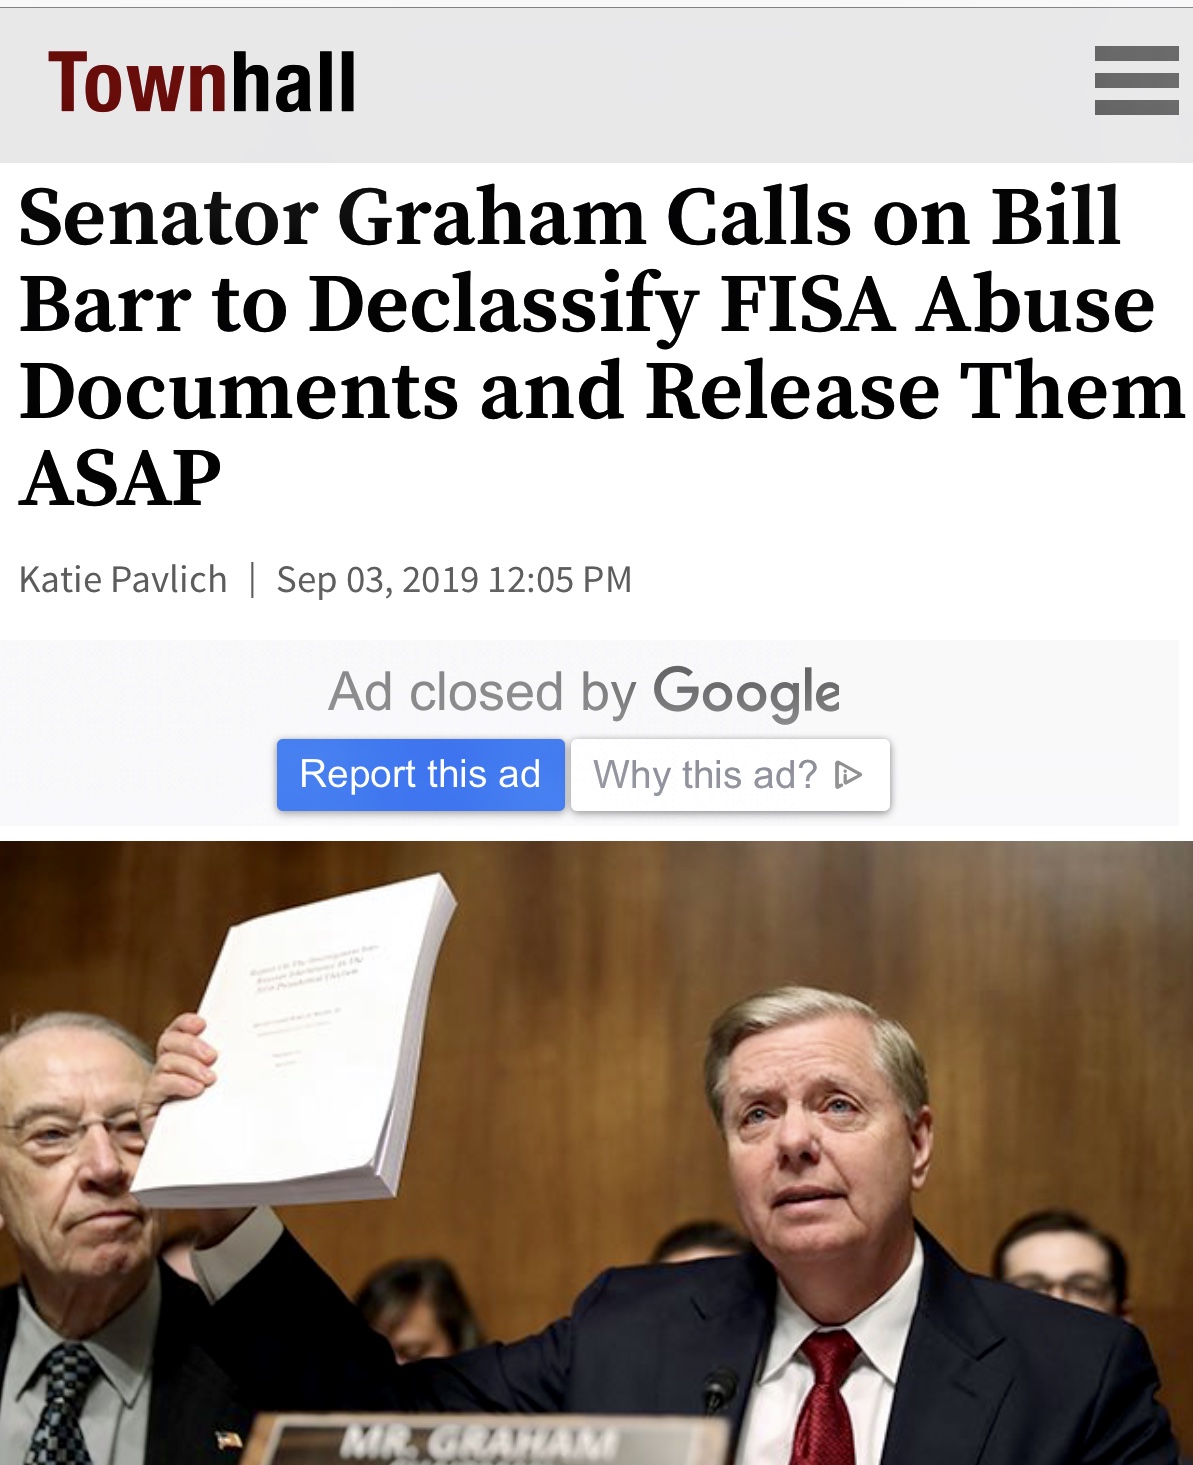 Senator Graham Calls on Bill Barr to Declassify FISA Abuse Documents and Release Them ASAP